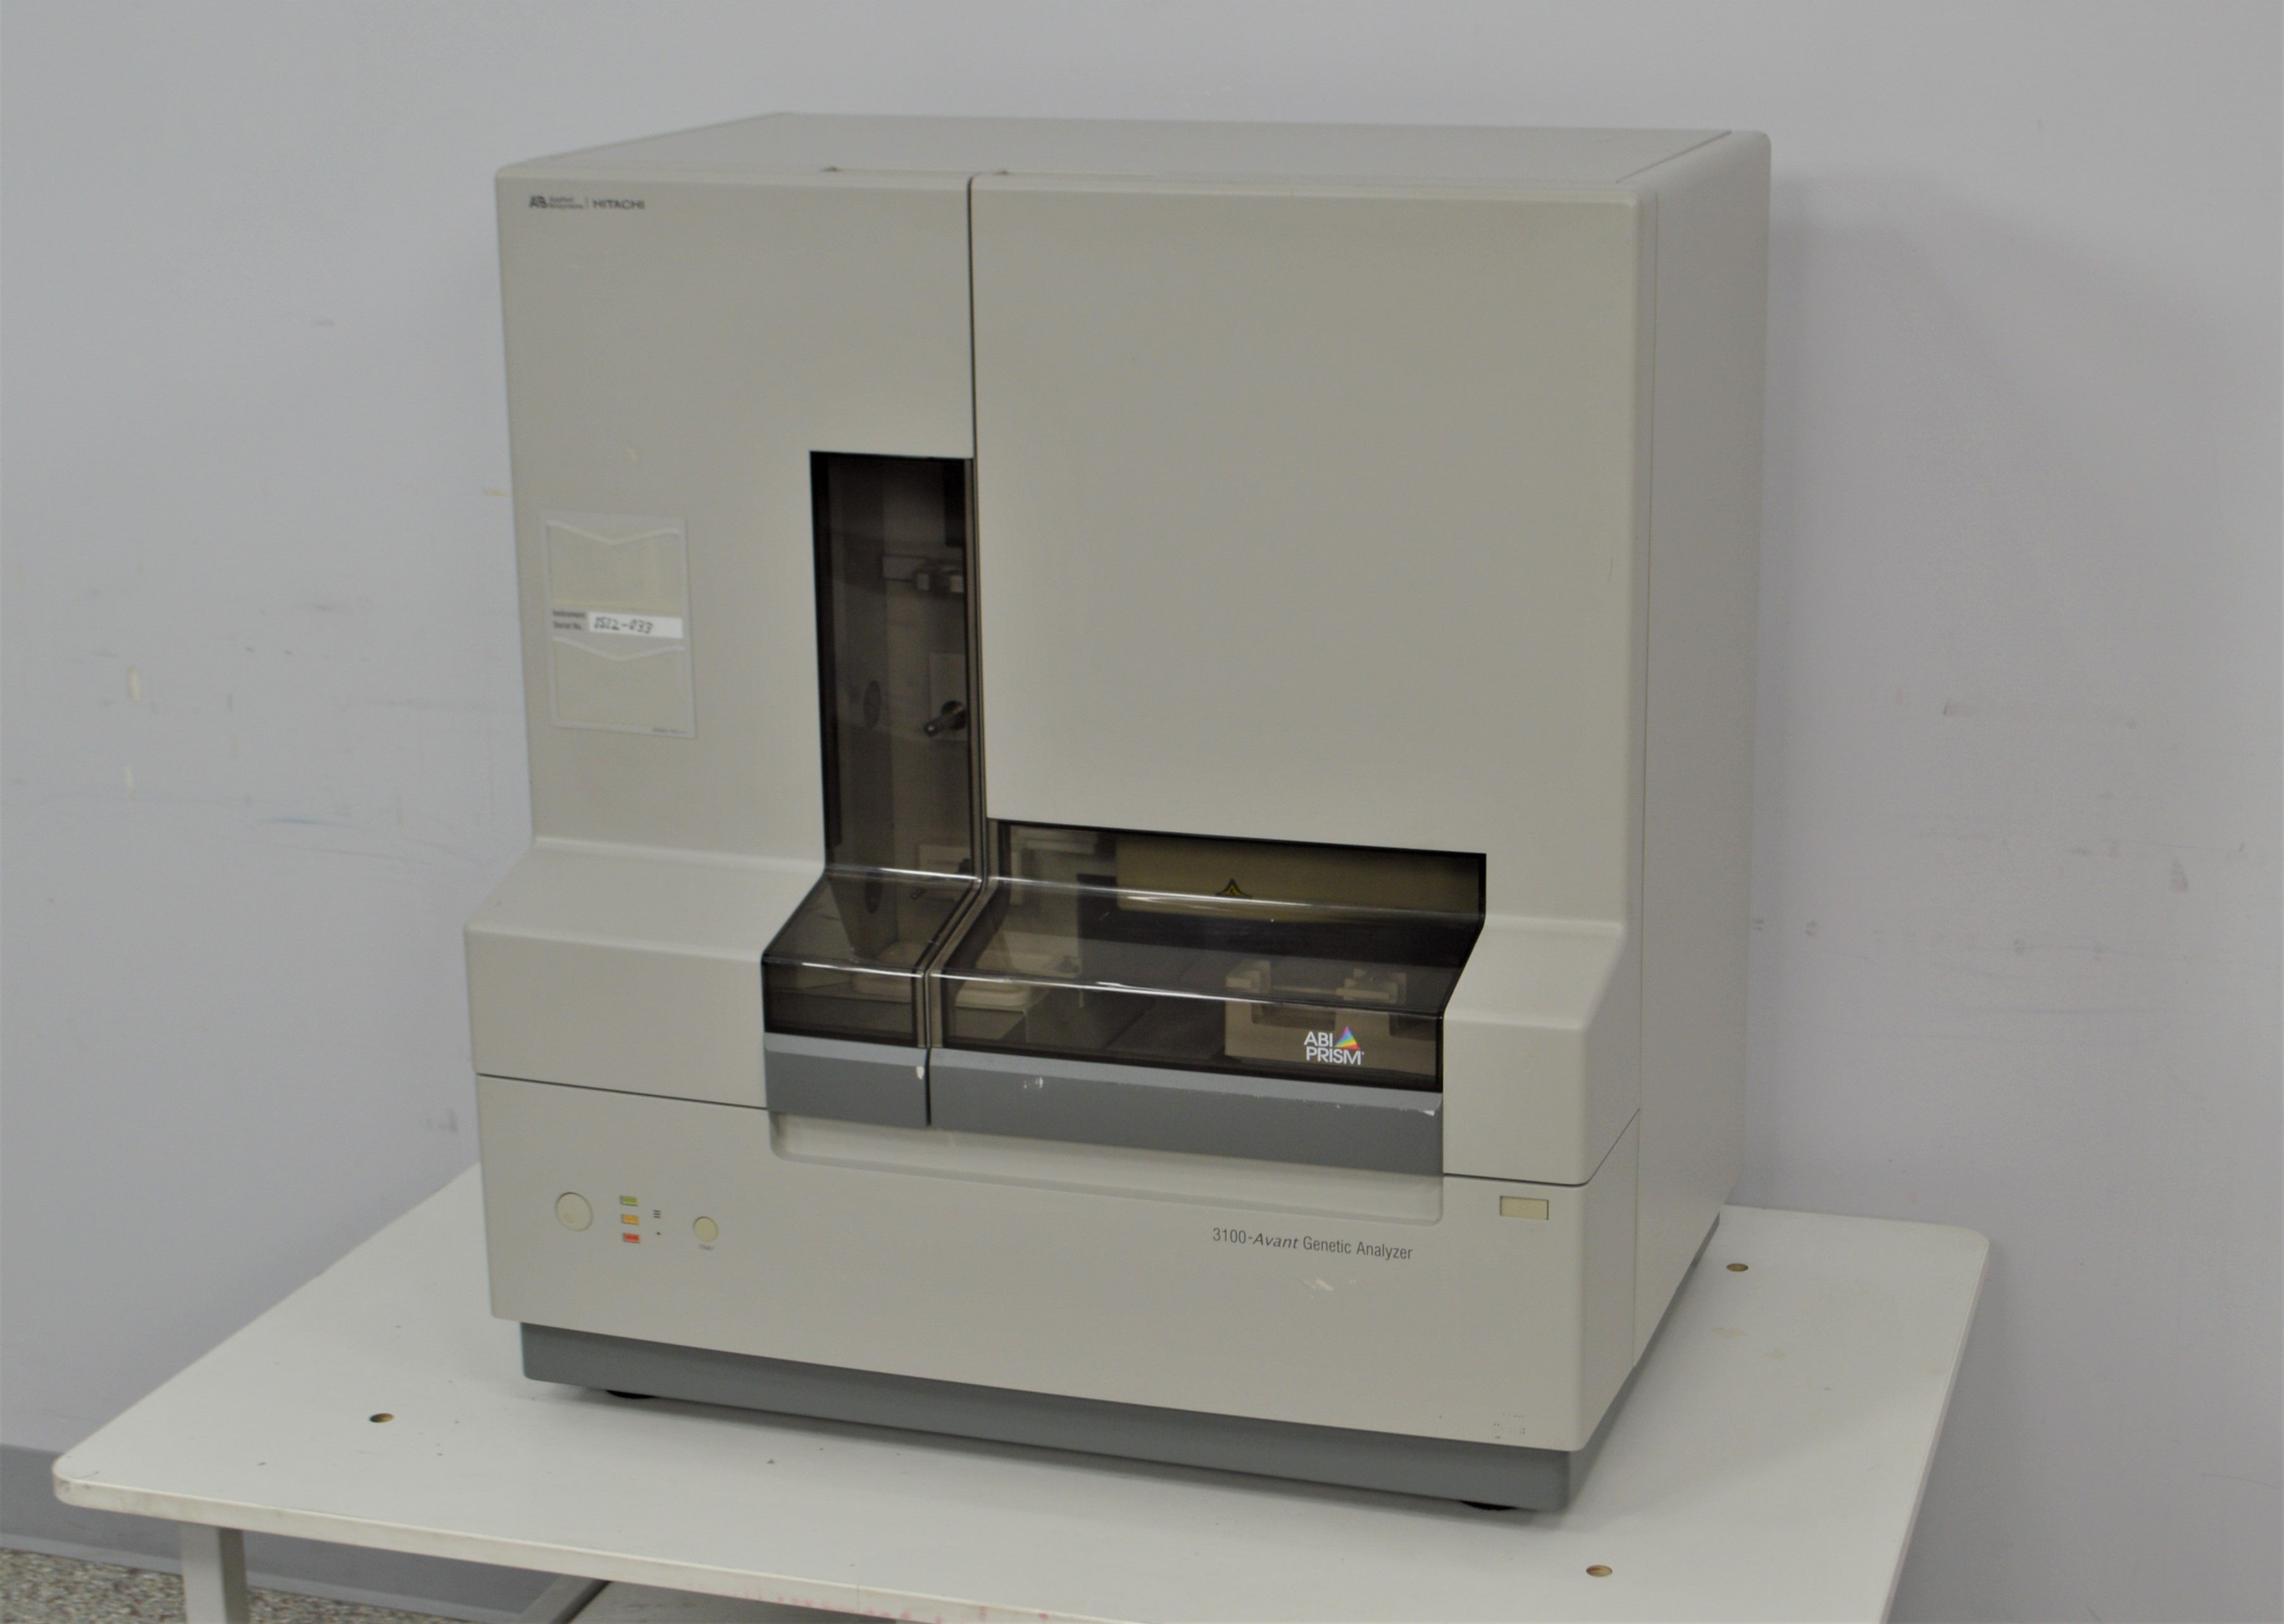 ABI Prism 3100 Genetic Analyzer/DNA Sequencer - Certified with Warranty